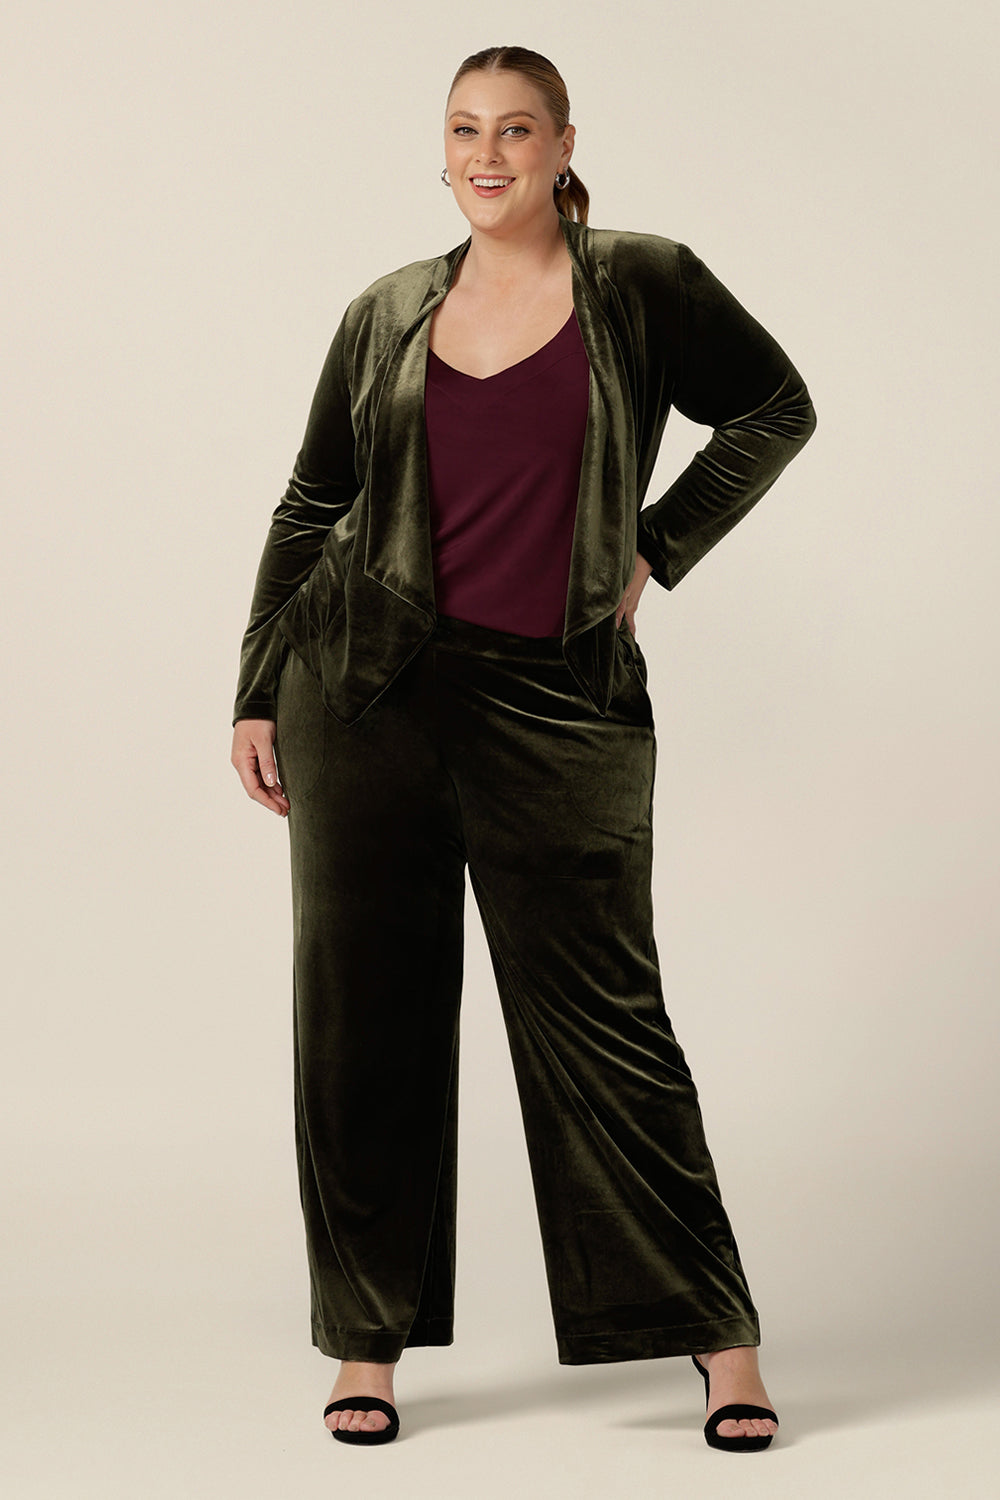 A size 18, plus size woman wears a waterfall front velour jacket for curve evening and cocktail wear. In bracken green this cocktail jacket is worn with wide leg velour trousers and a plum cami top as a cocktail pant suit. Good for evening and wedding guest outfits, shop made-in-Australian occasionwear in petite to plus sizes at Leina & Fleur.